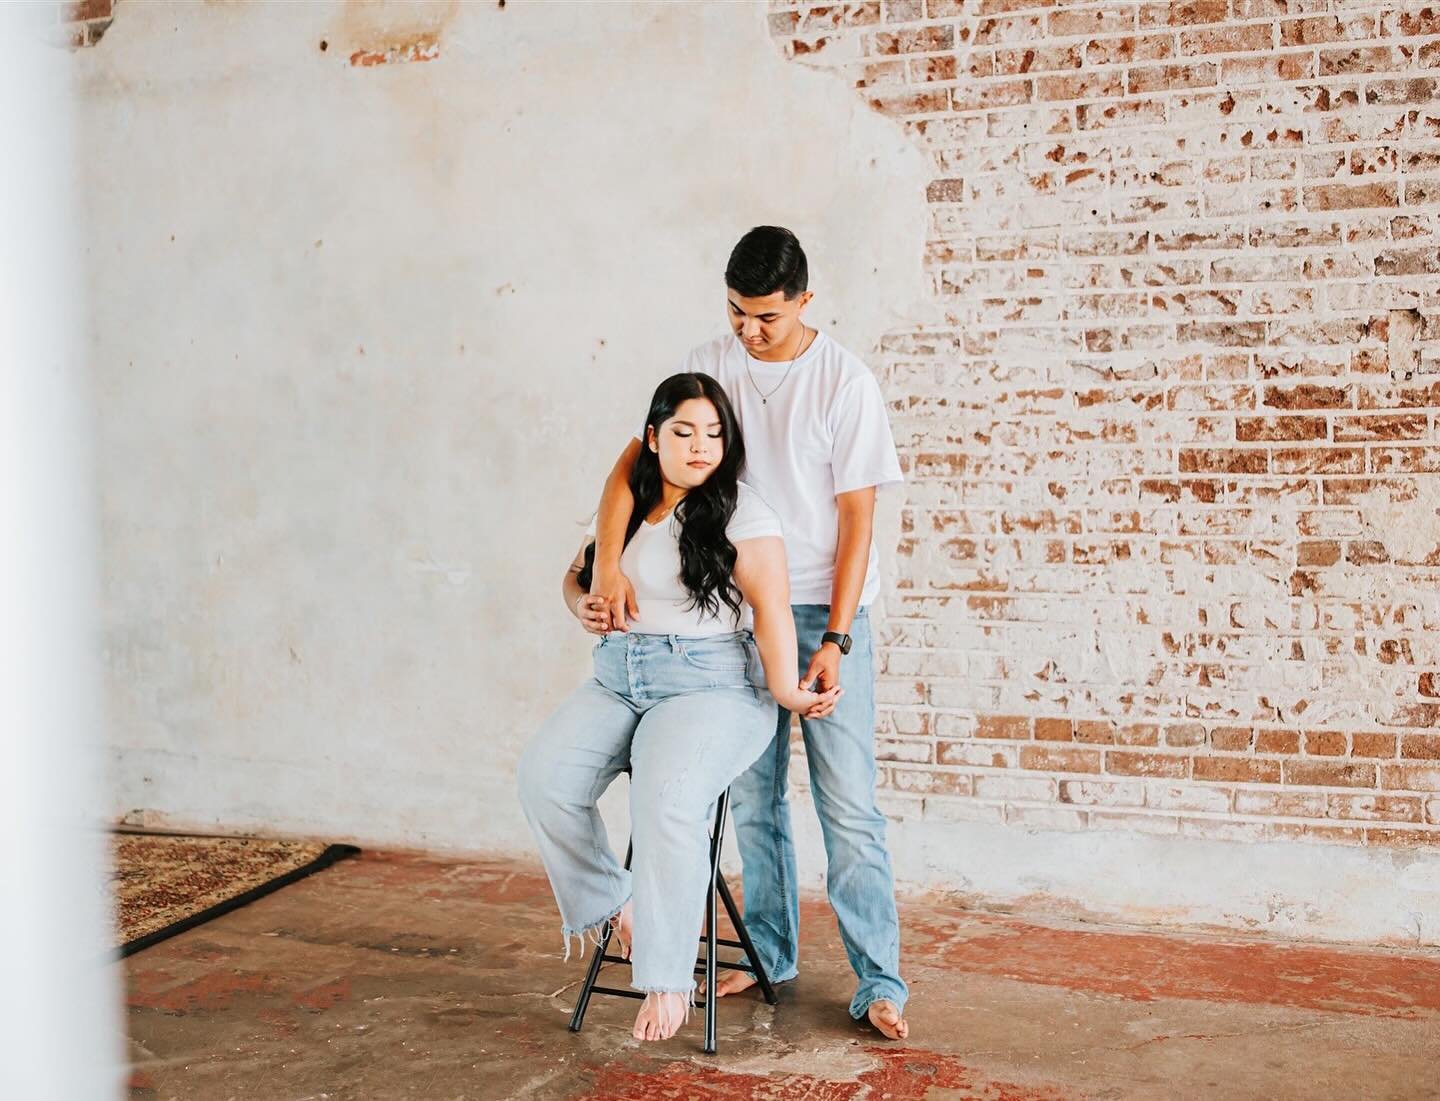 Just The Two of Us🩶
.
.
.
.
.
.
.
.
.
#coupleshoot #couplephotoshoot #couplephotography #kanisphotography #houstonphotographer #houstonphotography #houstoncouplesphotographer #downtownhouston #couplephoto #anniversary #anniversaryphotoshoot #houston